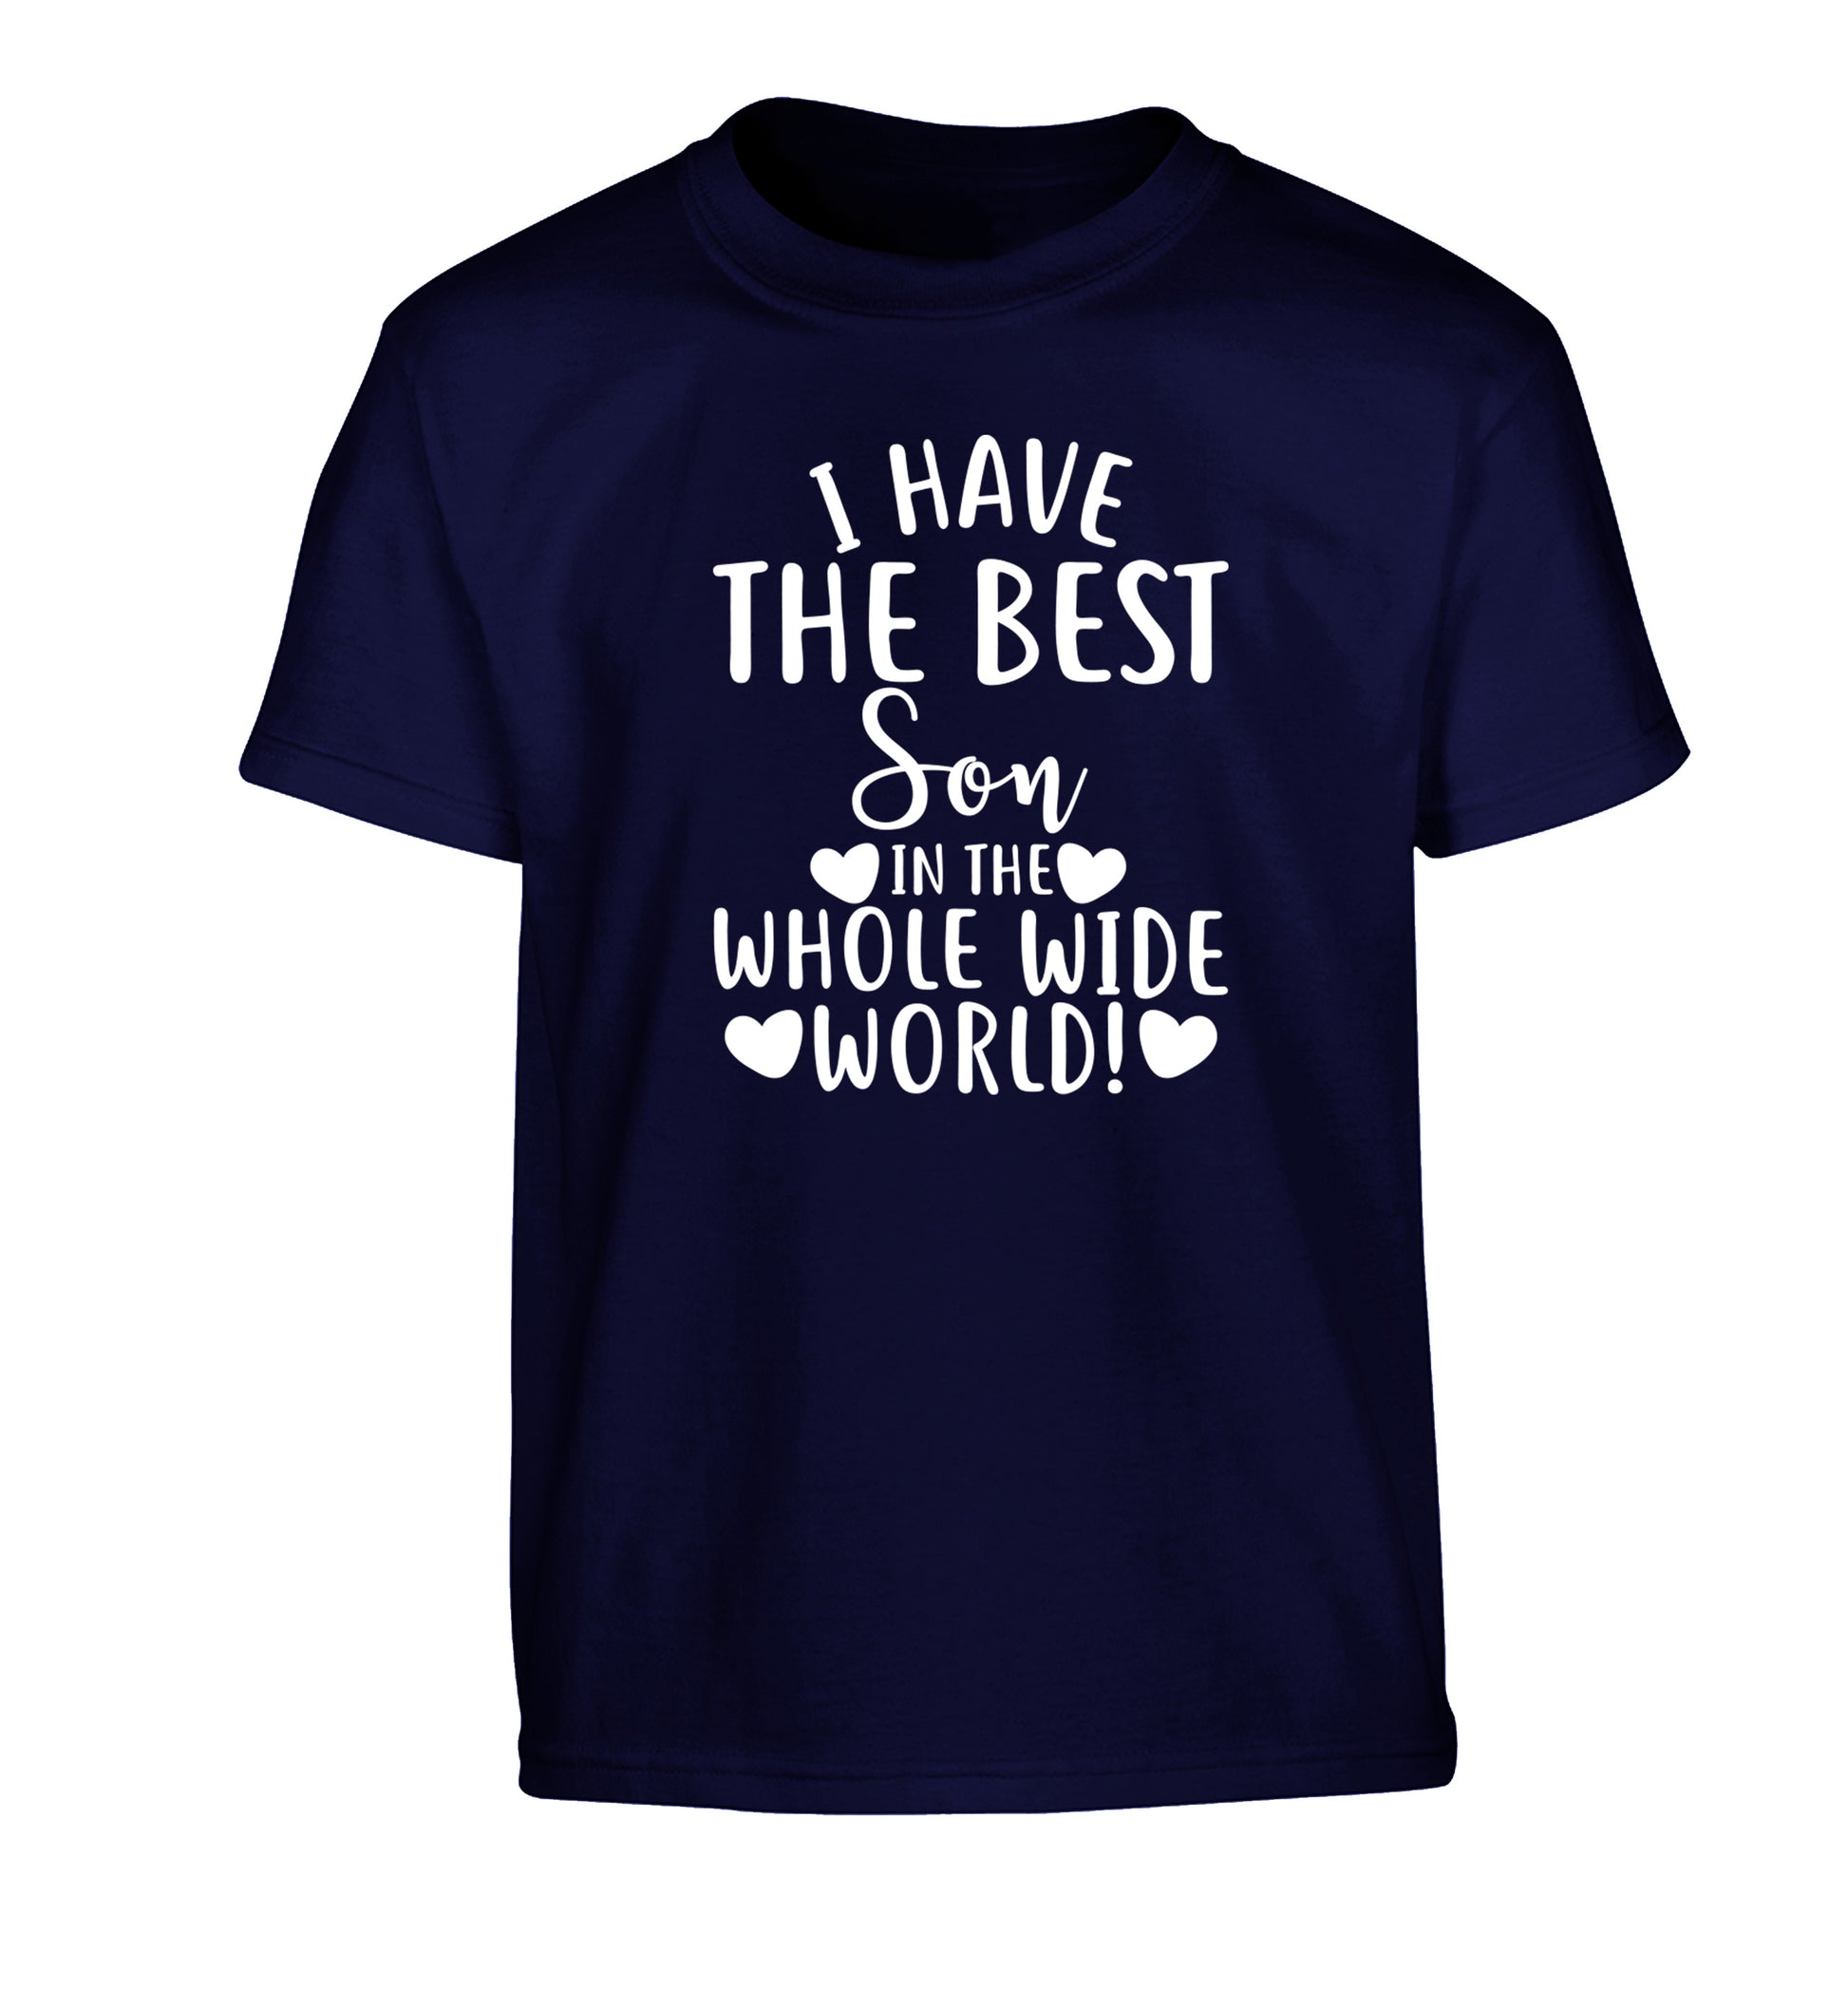 I have the best son in the whole wide world! Children's navy Tshirt 12-13 Years